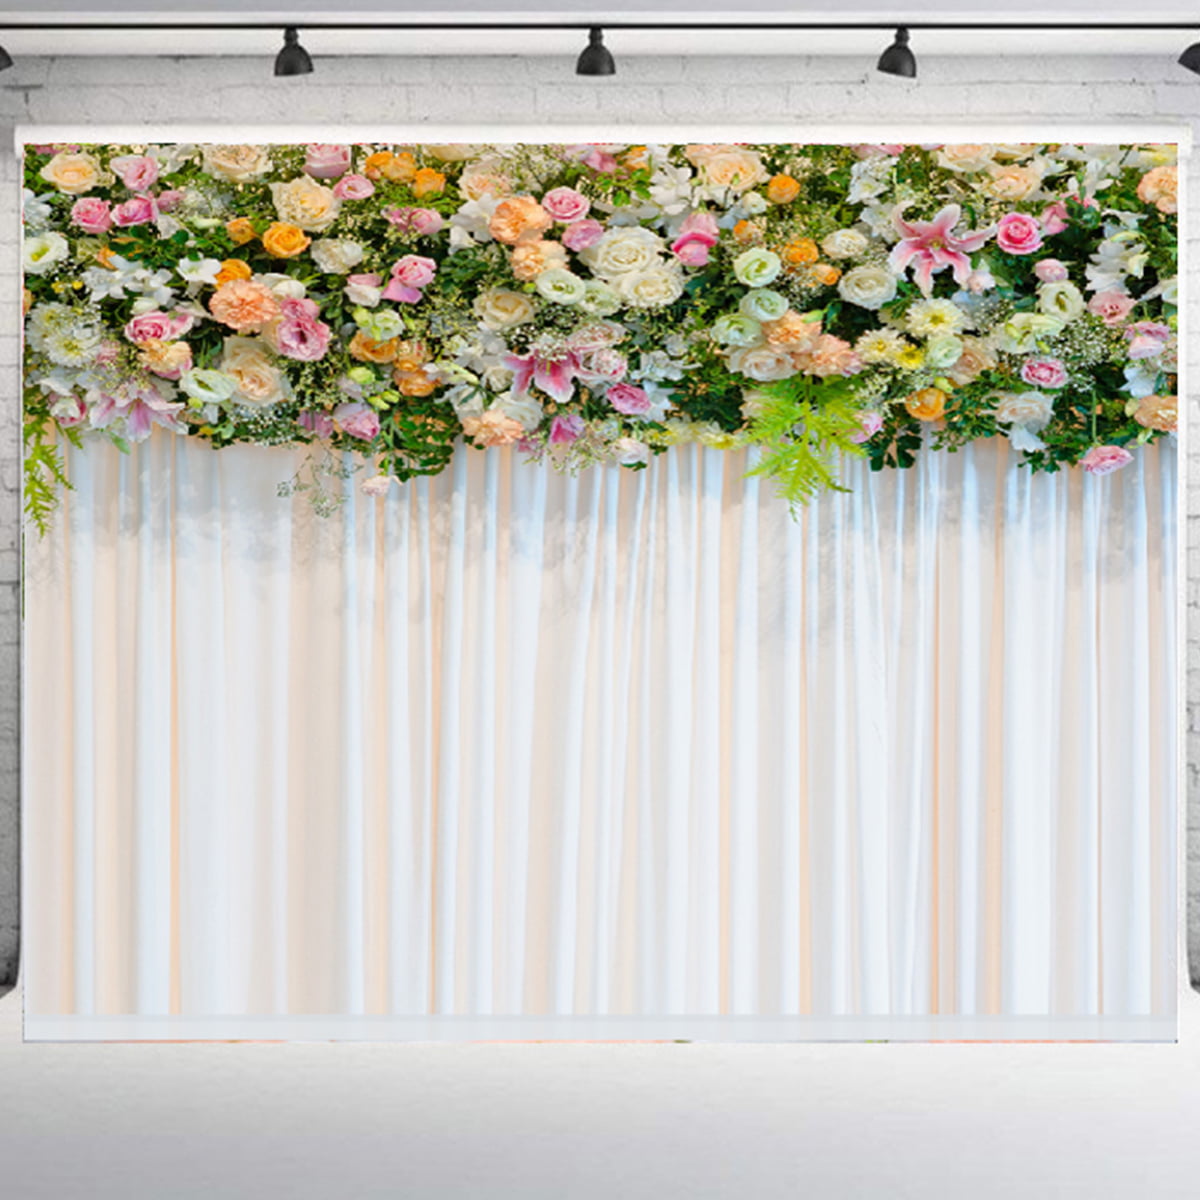 3X5FT 5X7FT Rose Flower Wall Backdrops Wedding Party Decor Photo Background